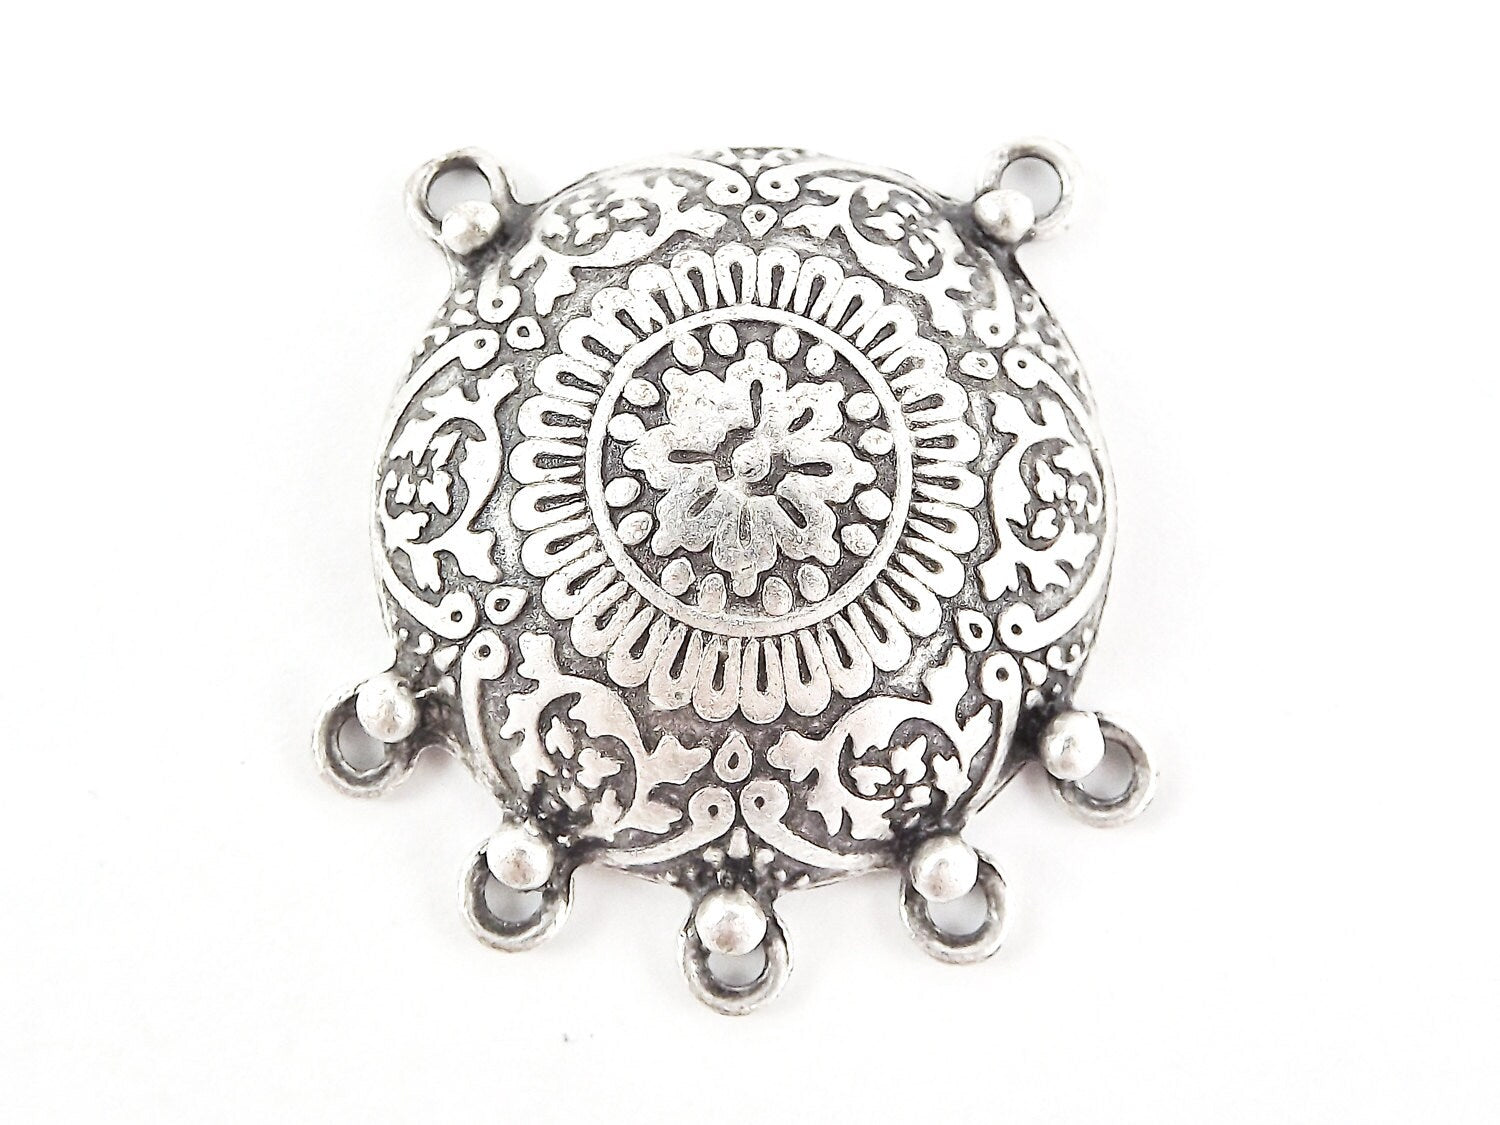 Large Mandala Folk Boho Style Pendant Connector with 5 Loops - Matte Antique Silver Plated - 1PC